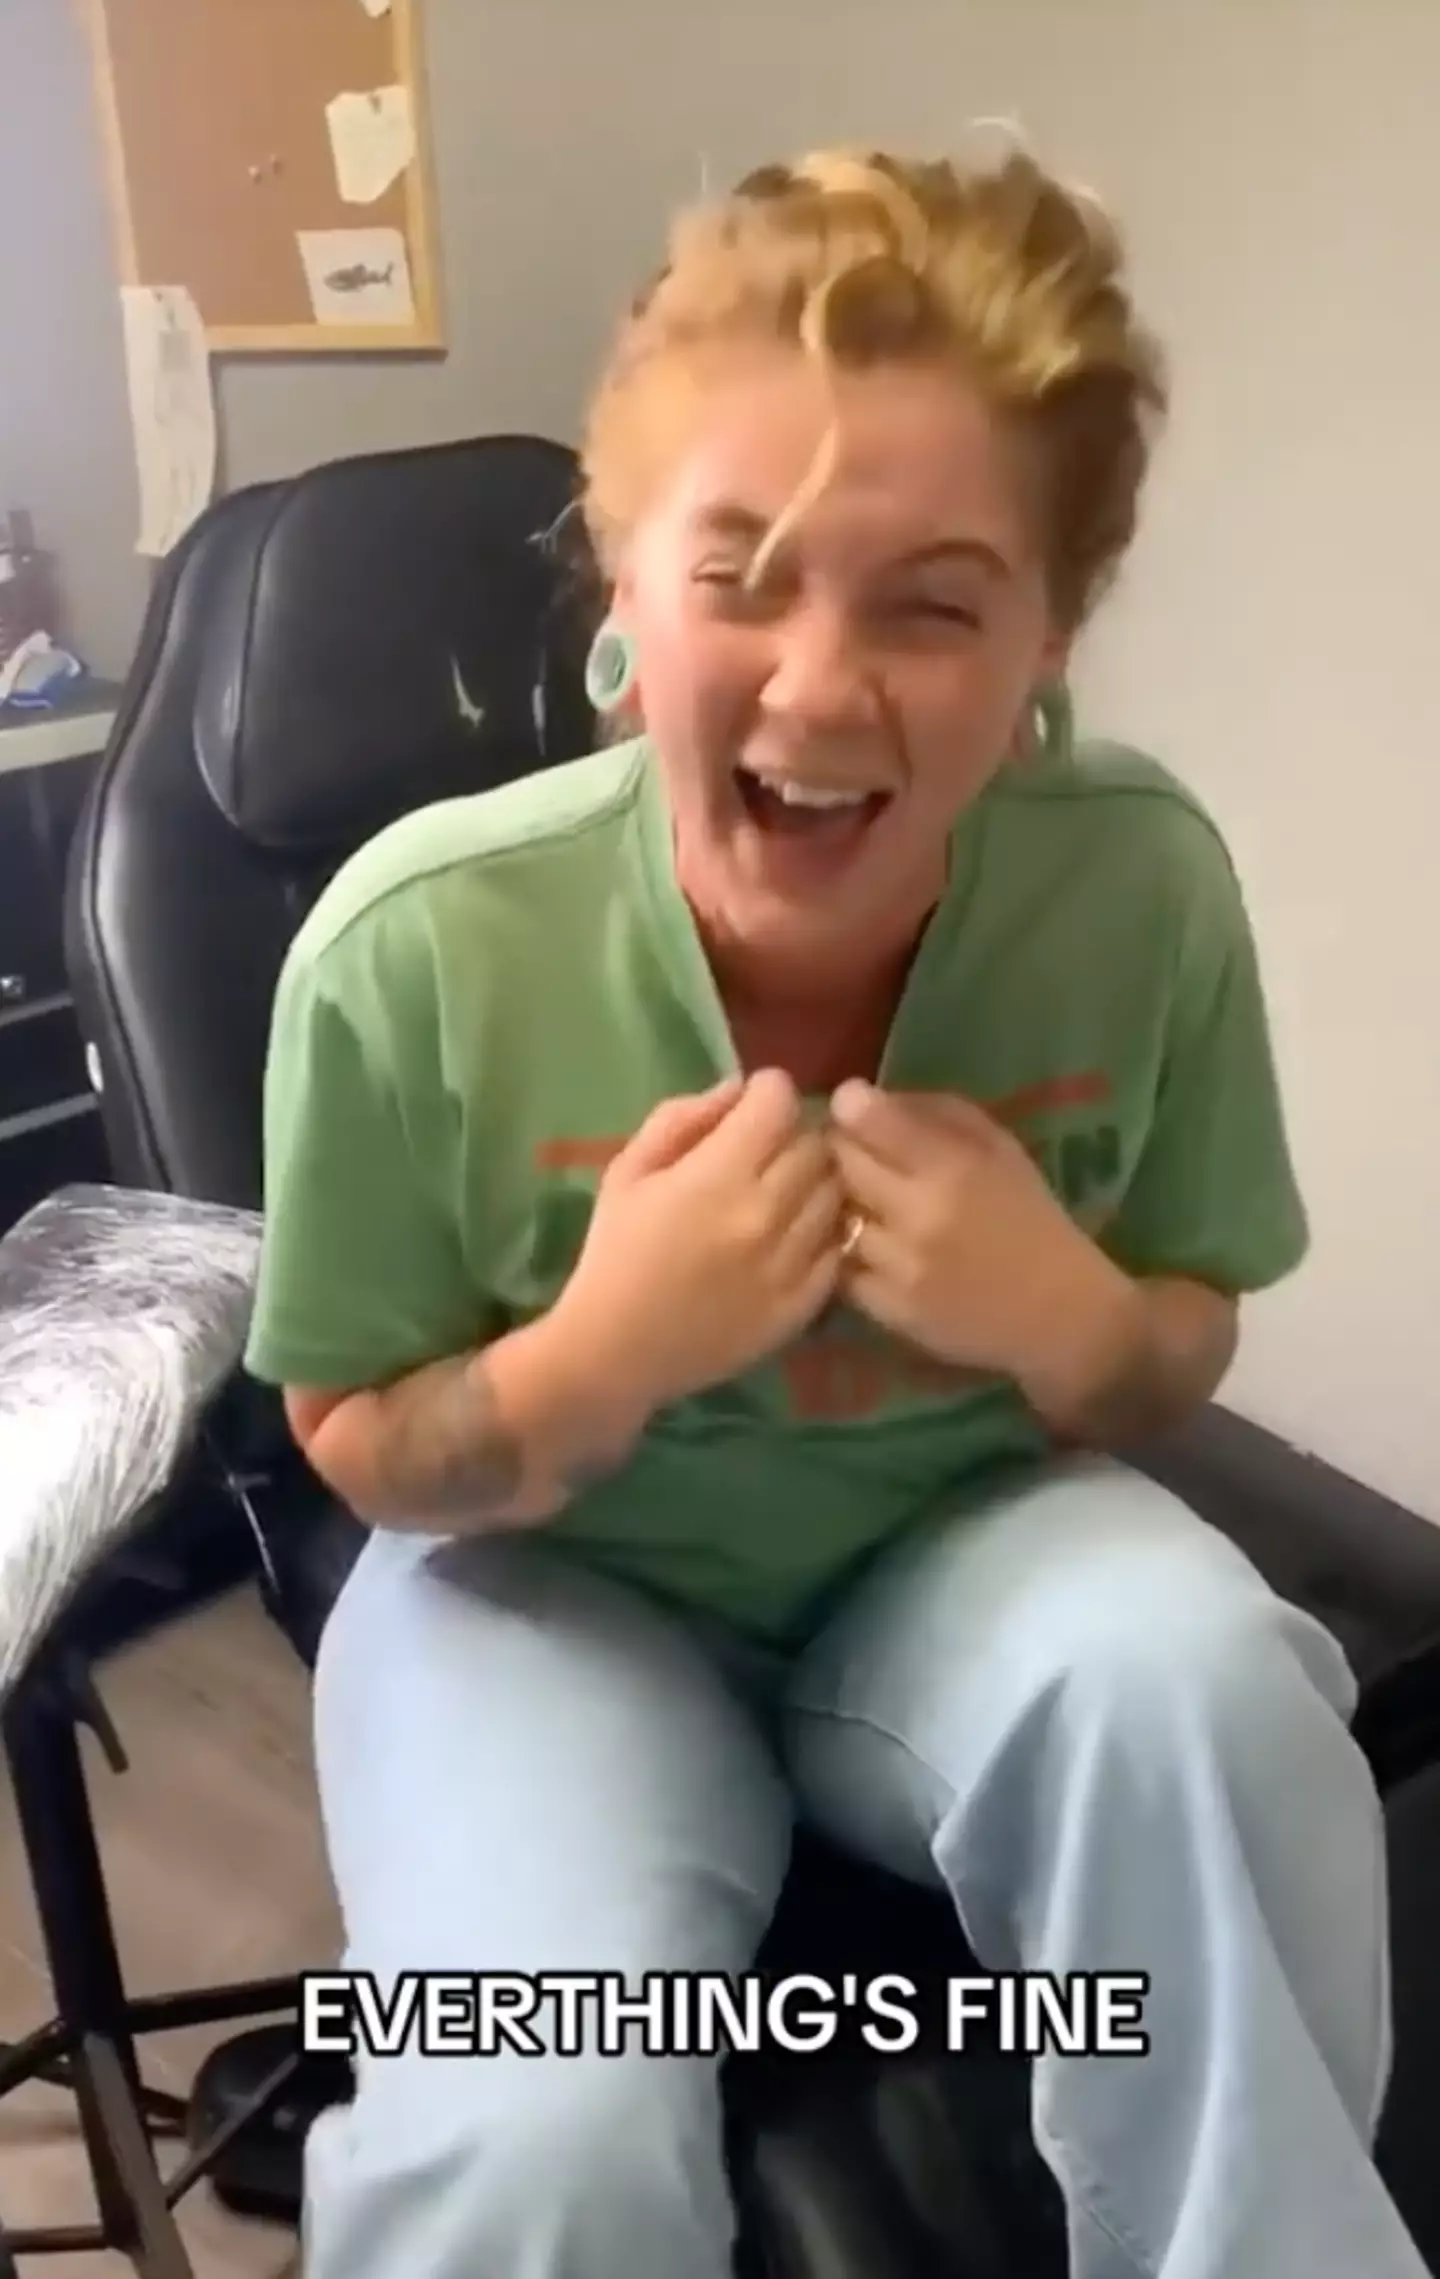 The woman was left in hysterics over the little tattoo mishap. (TikTok/@theearthylama)